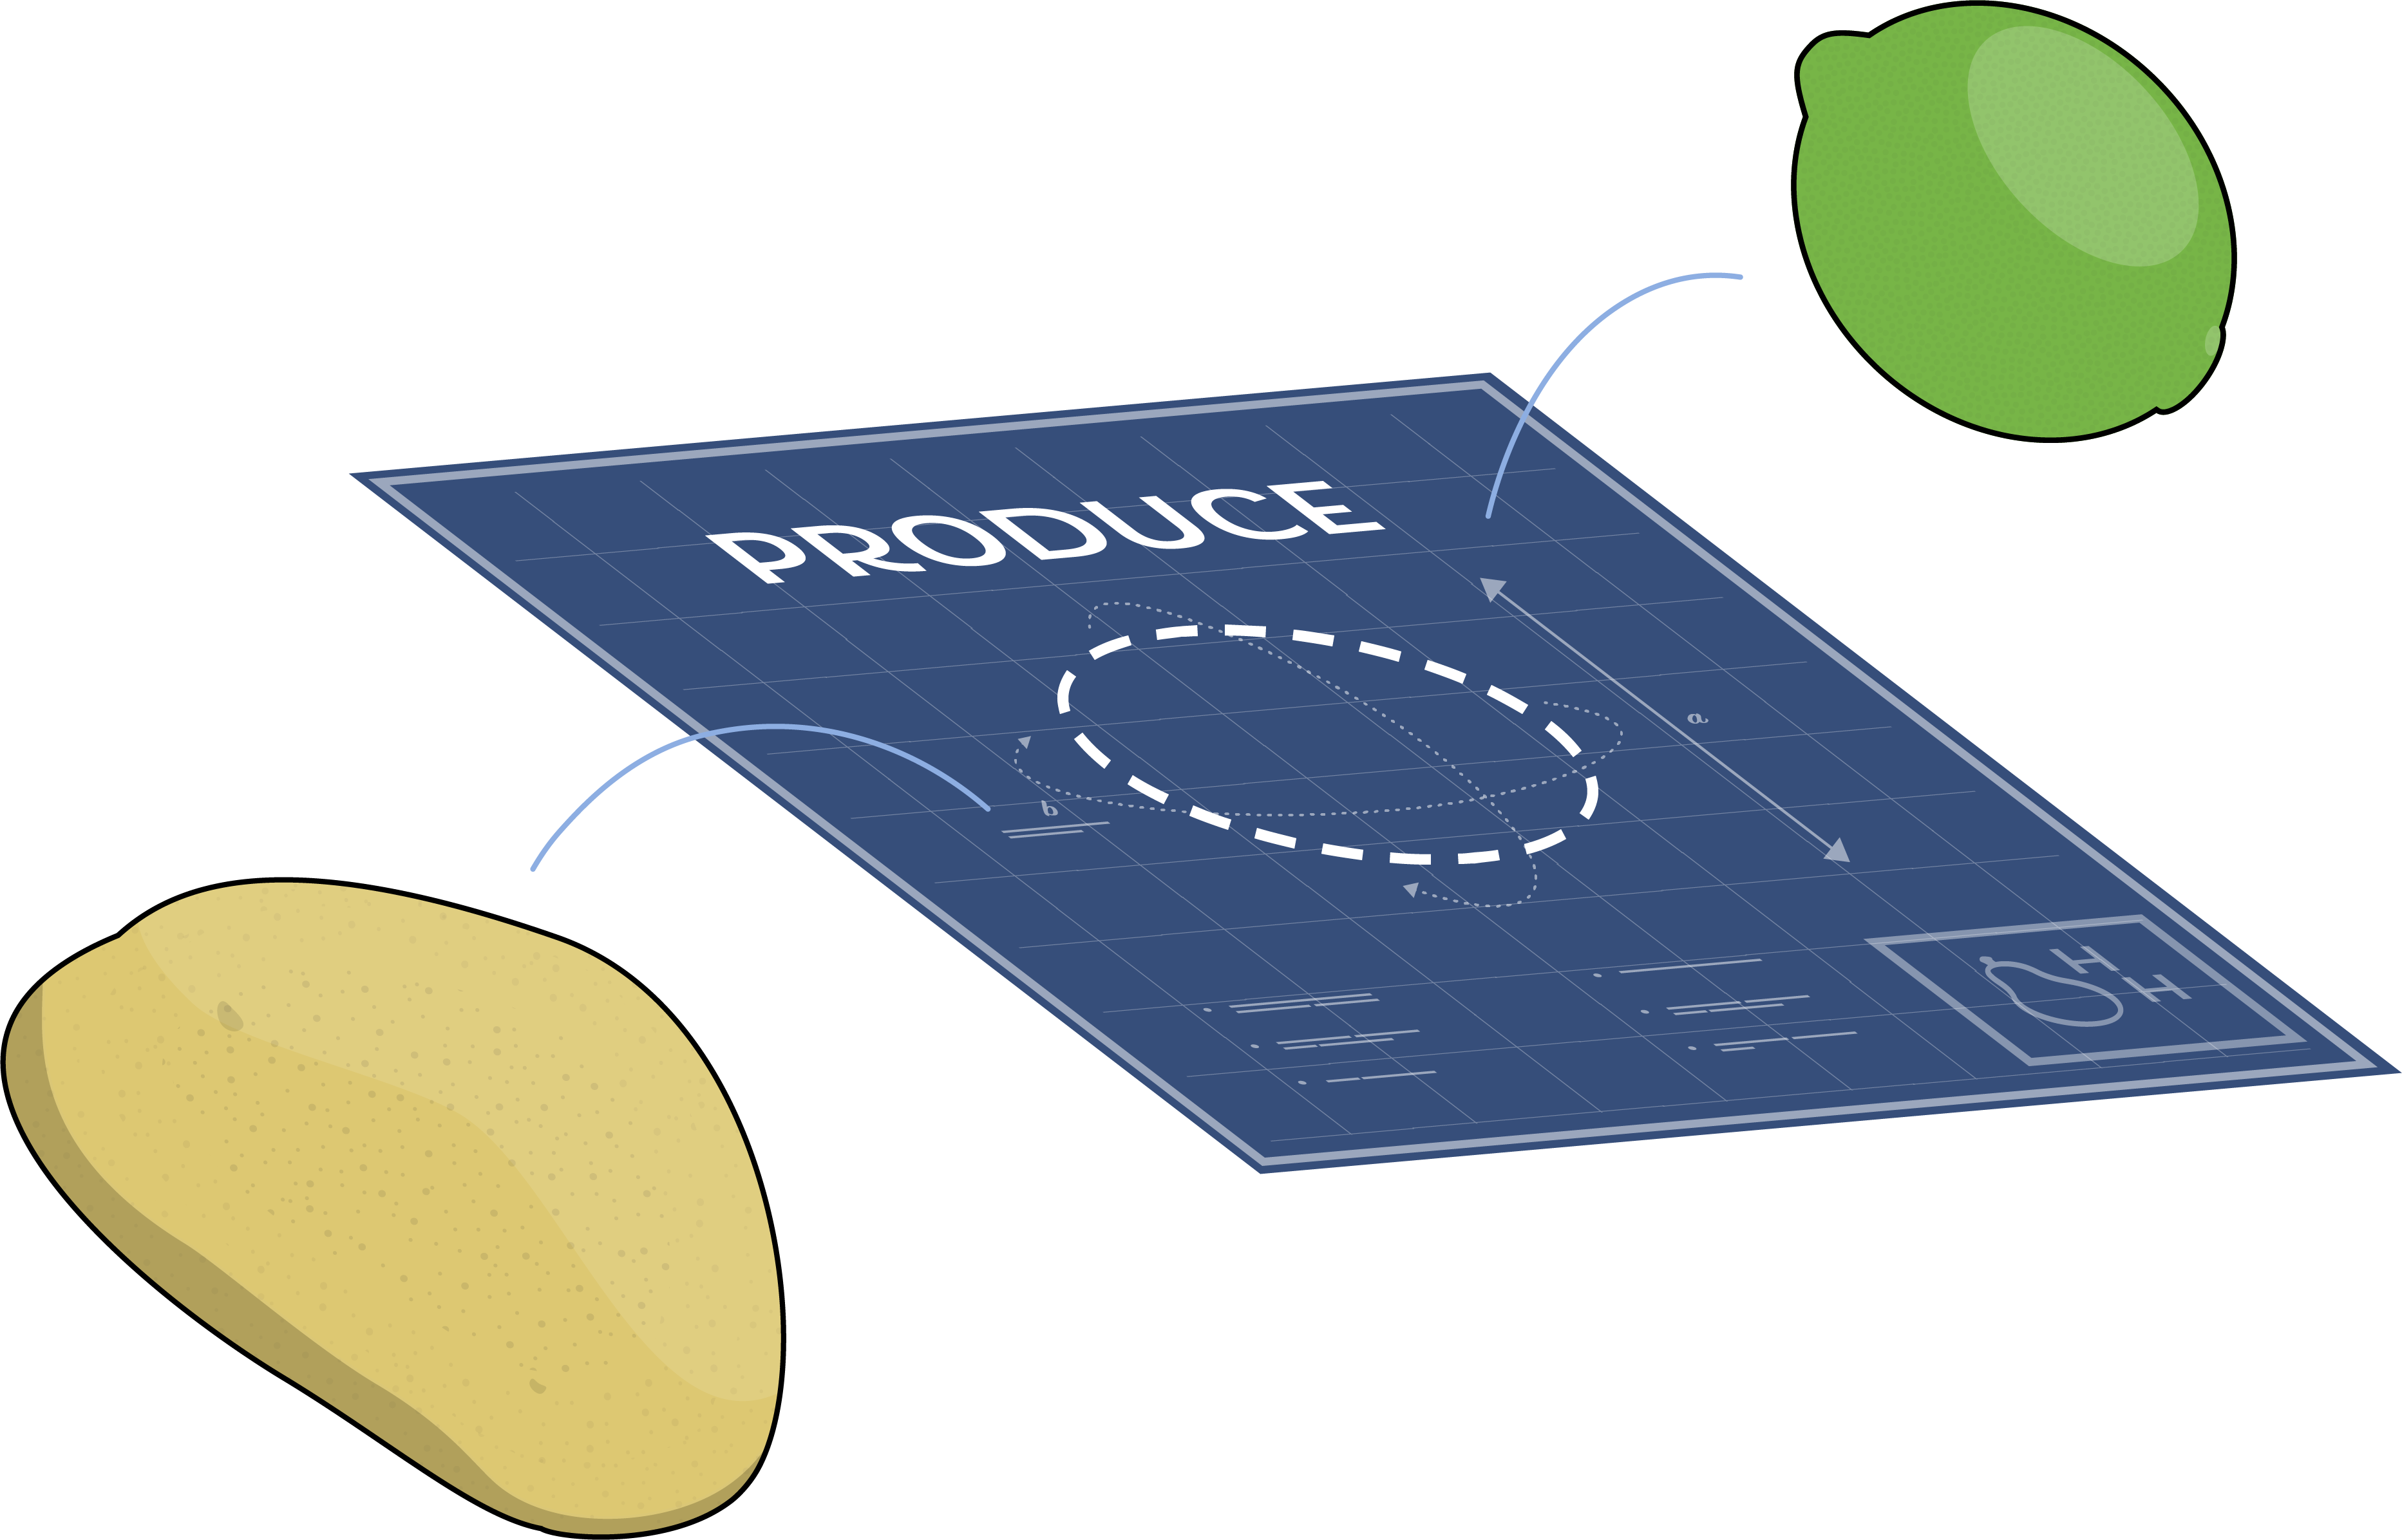 An image showing a blueprint representing "Produce", which can be used to represent a lime just as well as a potato.